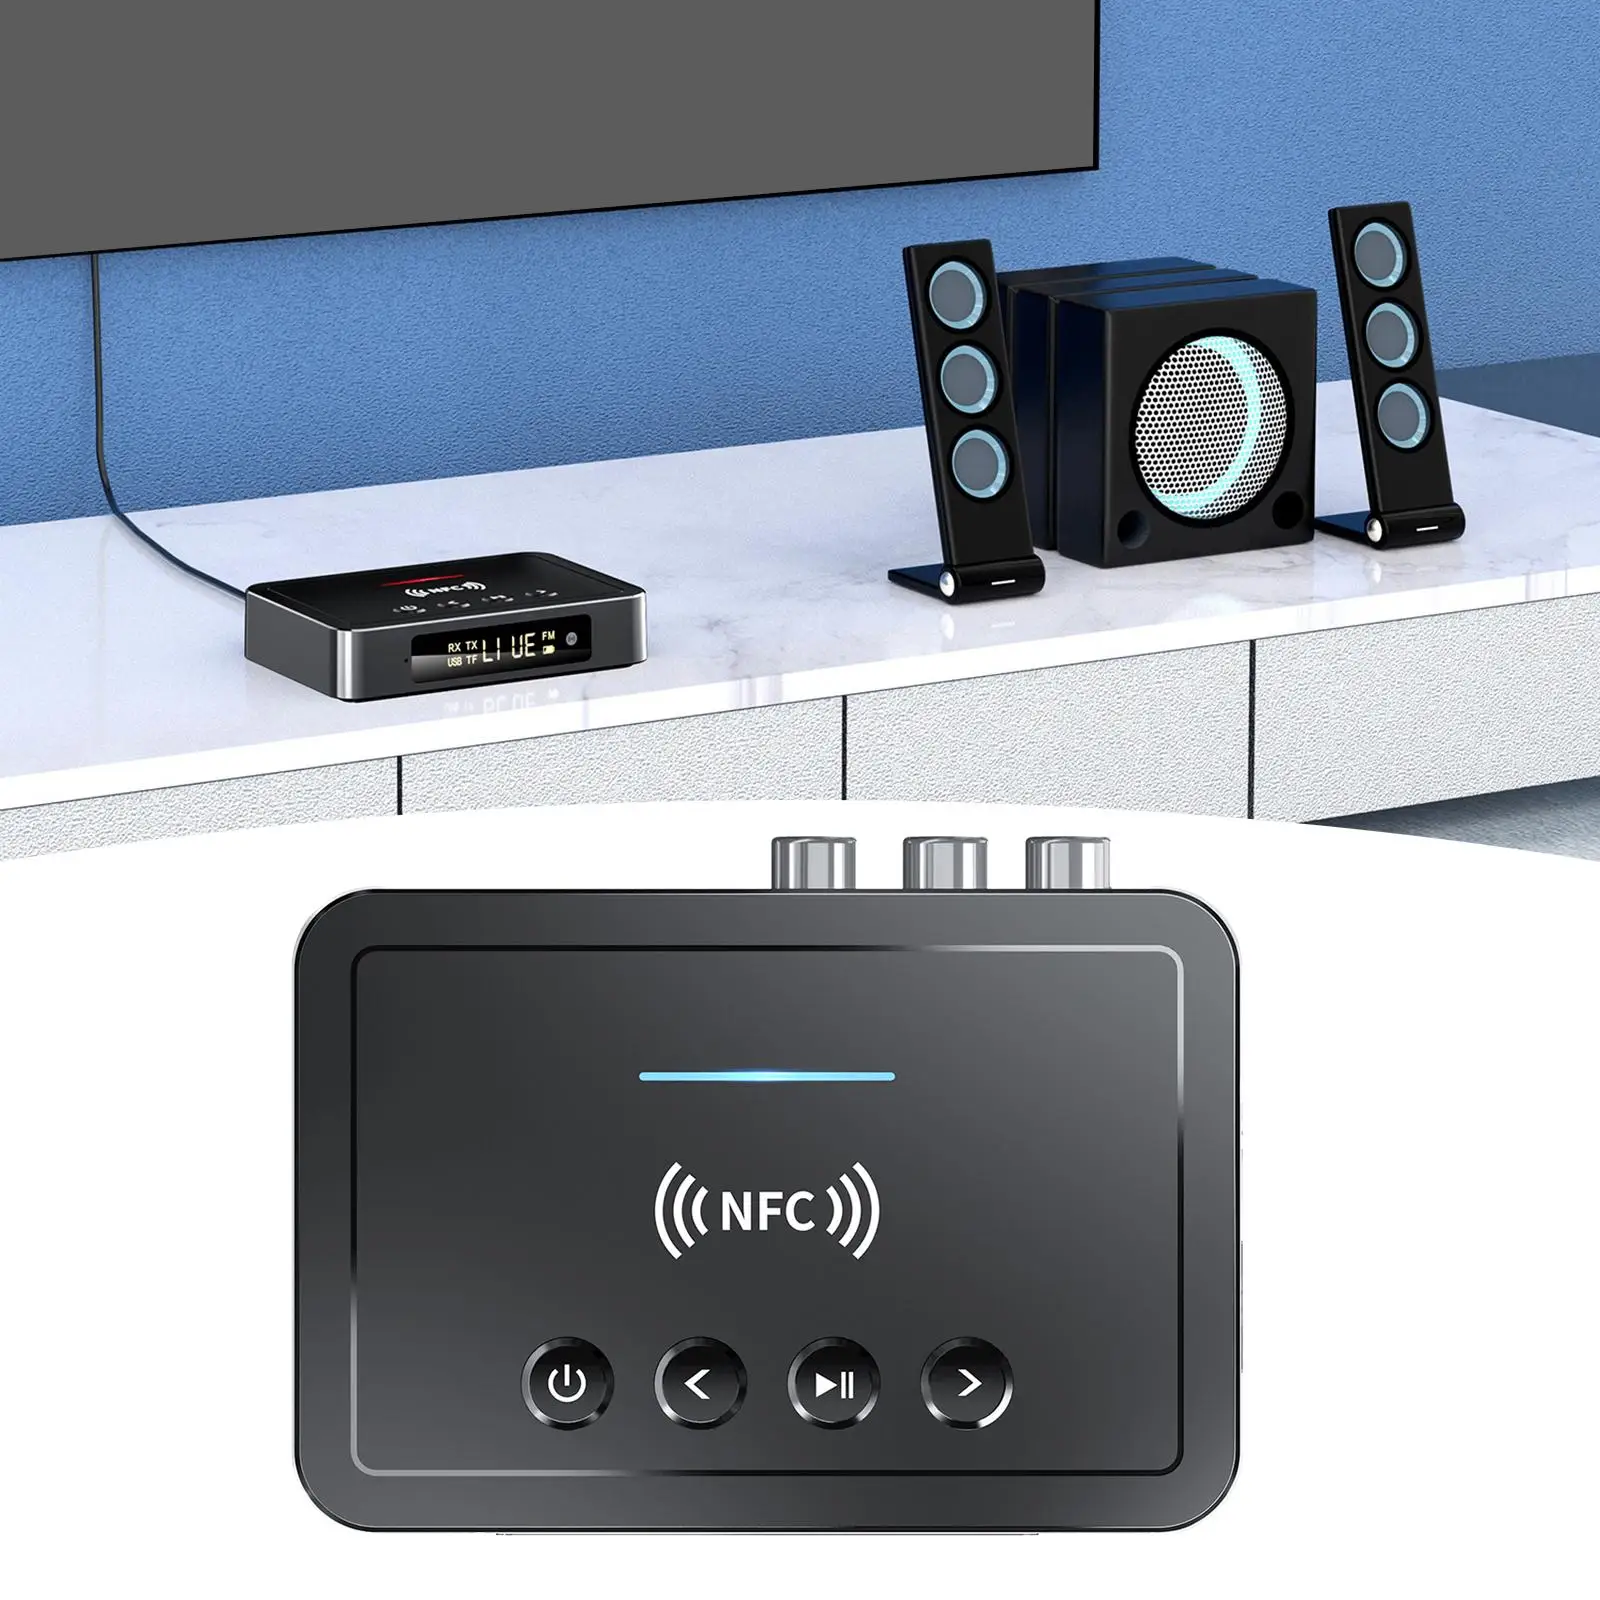 NFC Bluetooth 5.0 Transmitter Receiver 3.5mm AUX RCA with Mic FM Wireless Adapter for PC Speaker TV Headset HiFi Music